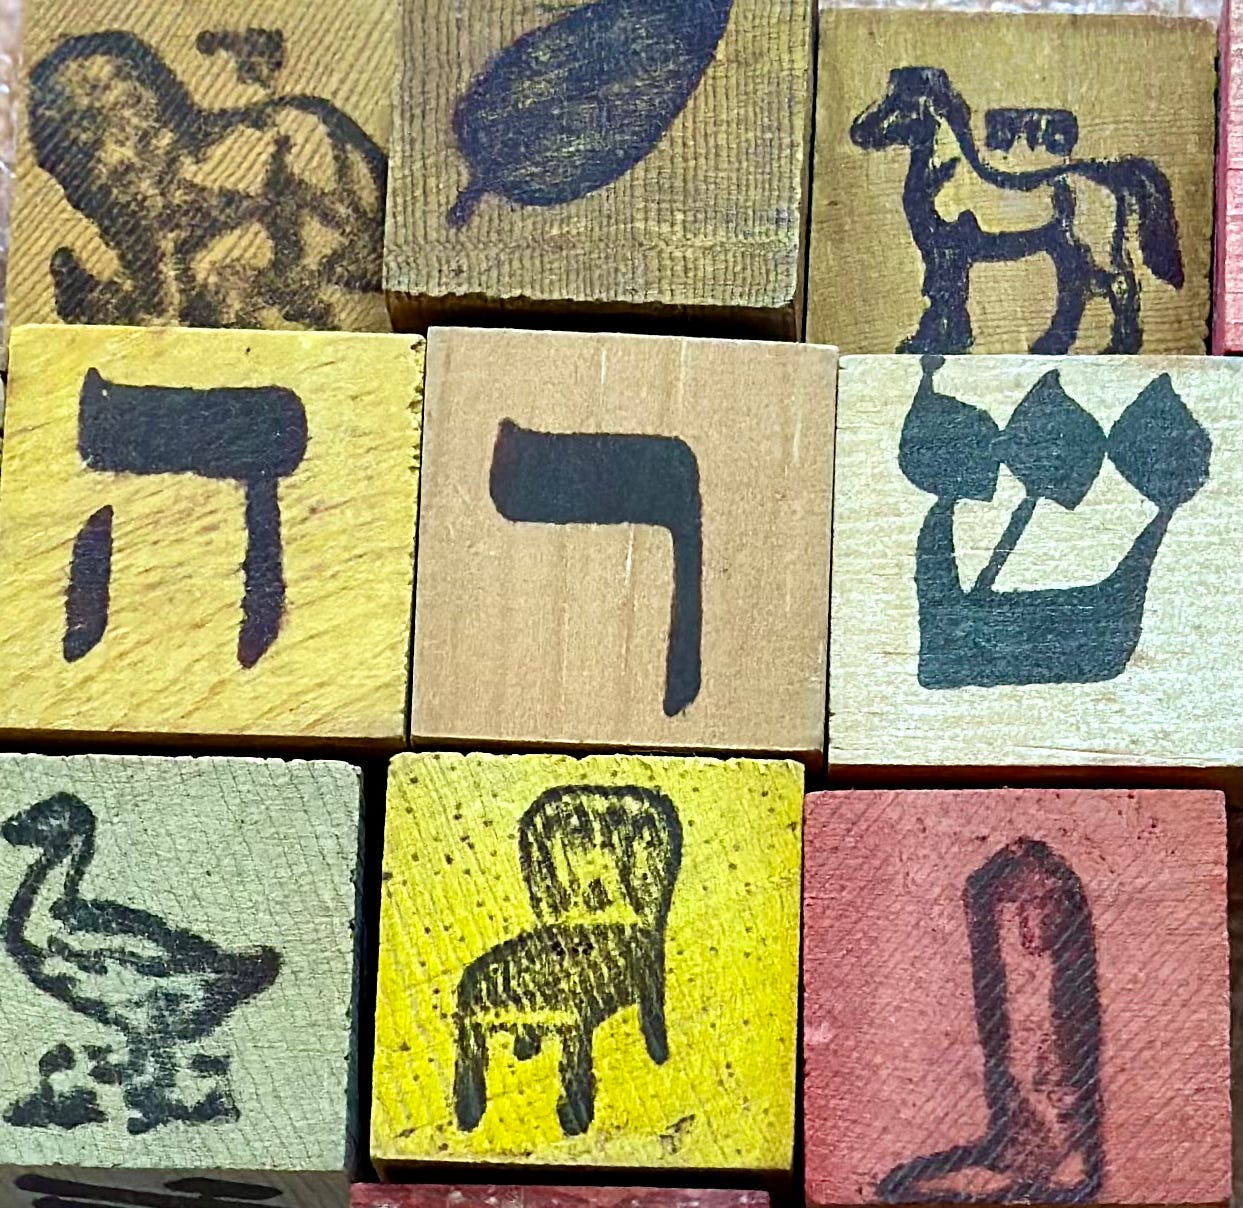 Wooden Aleph Bet blocks spelling out 'SRH' or Sarah